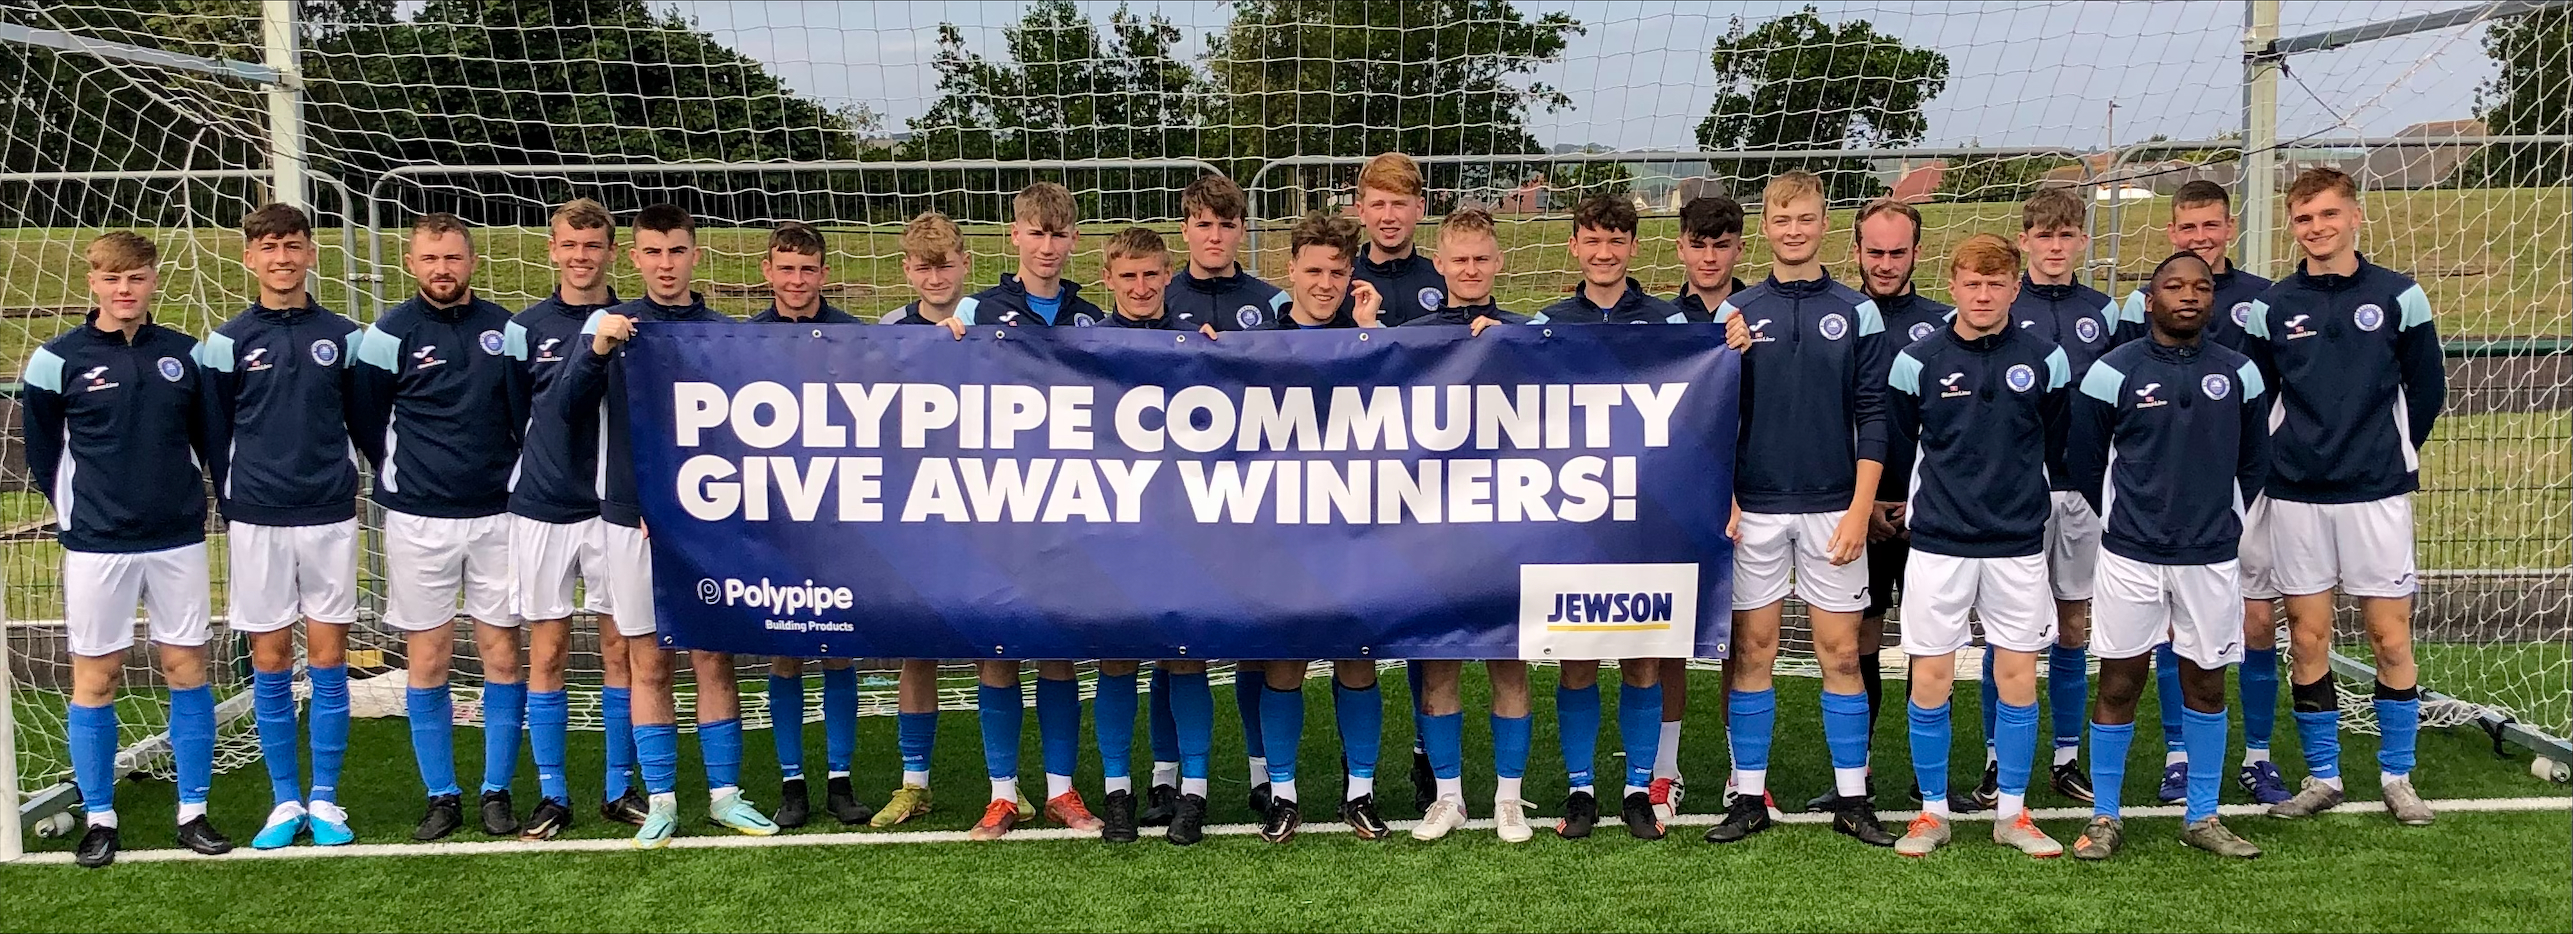 Jewson and Polypipe announce winners of Scottish youth sports kit giveaway